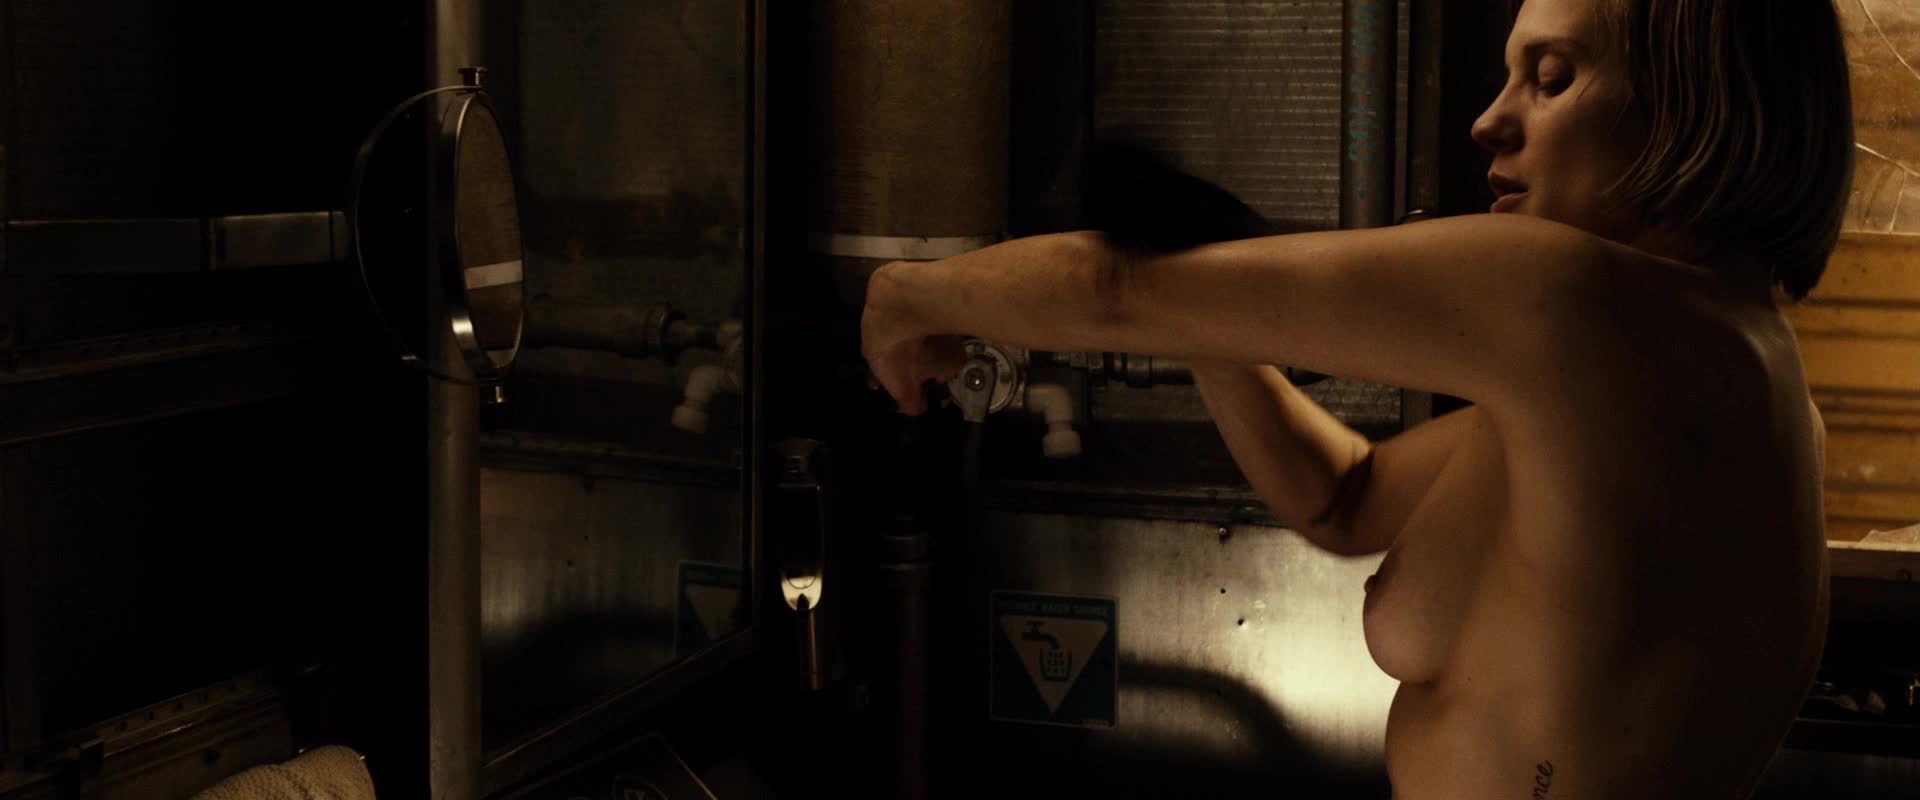 Fire S. reccomend Katee sackhoff fucking naked